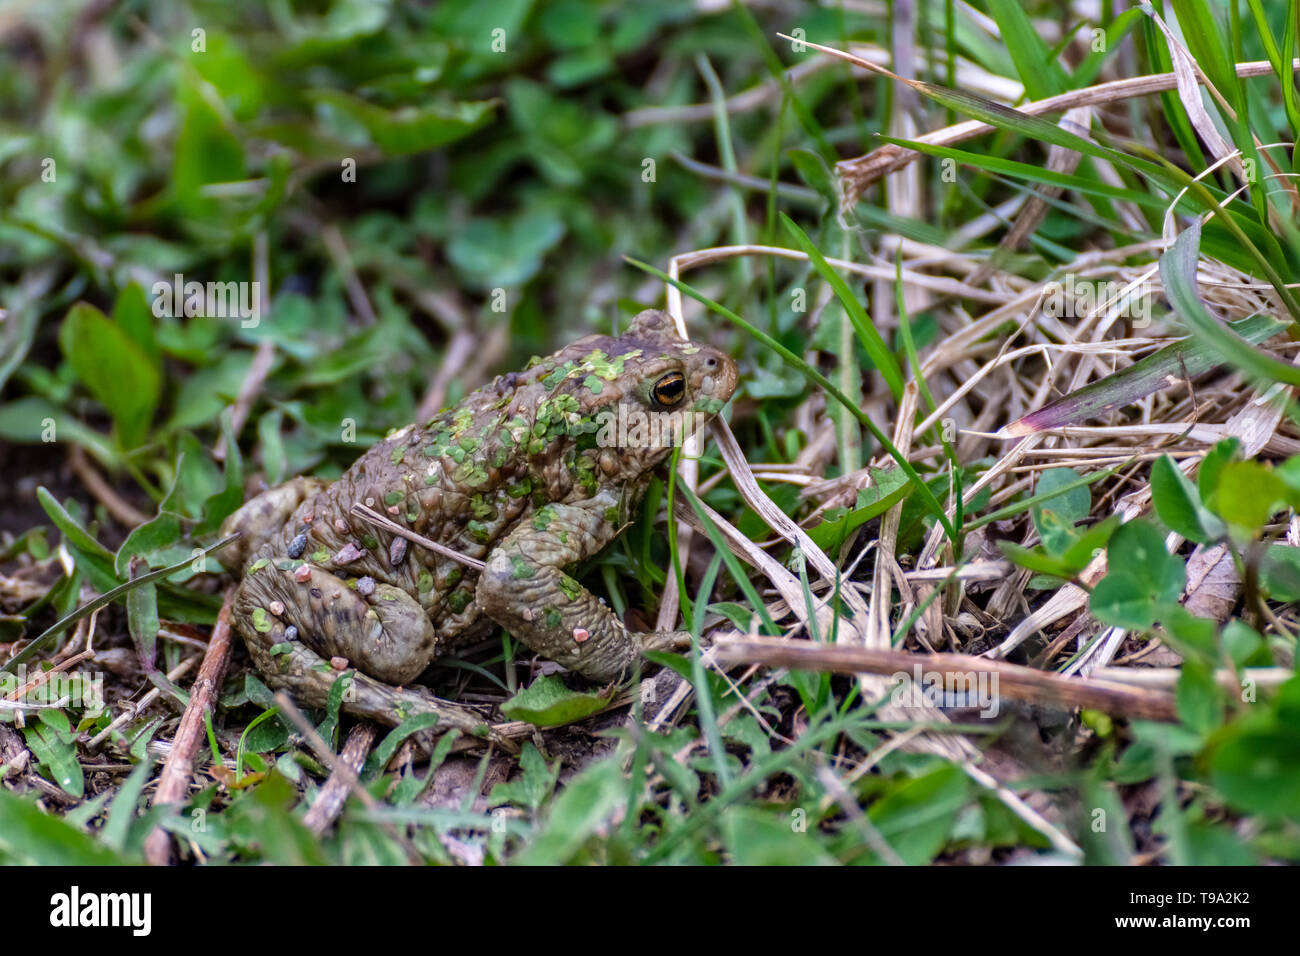 Brown frog covered in duckweed and small pebbles sits in the green grass. Stock Photo